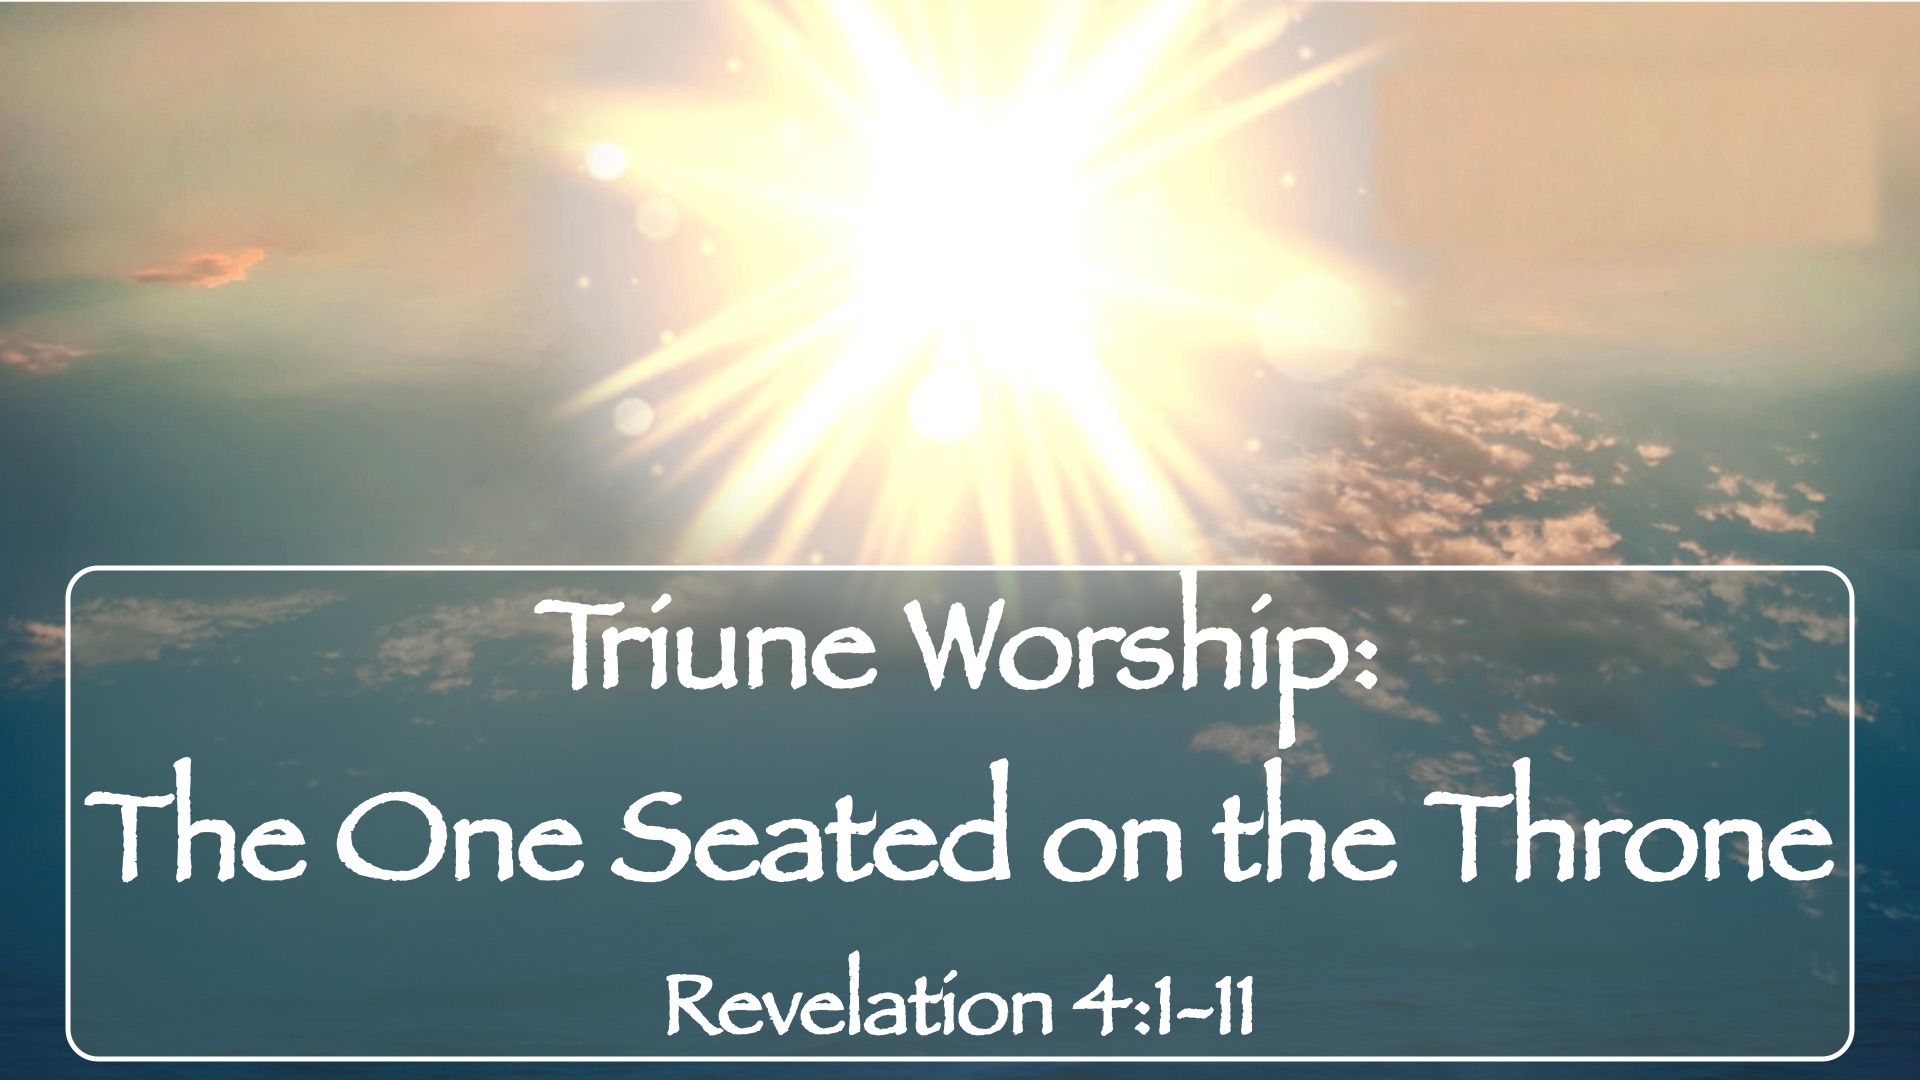 “Book of Revelation:  Triune Worship – The One Seated on the Throne”